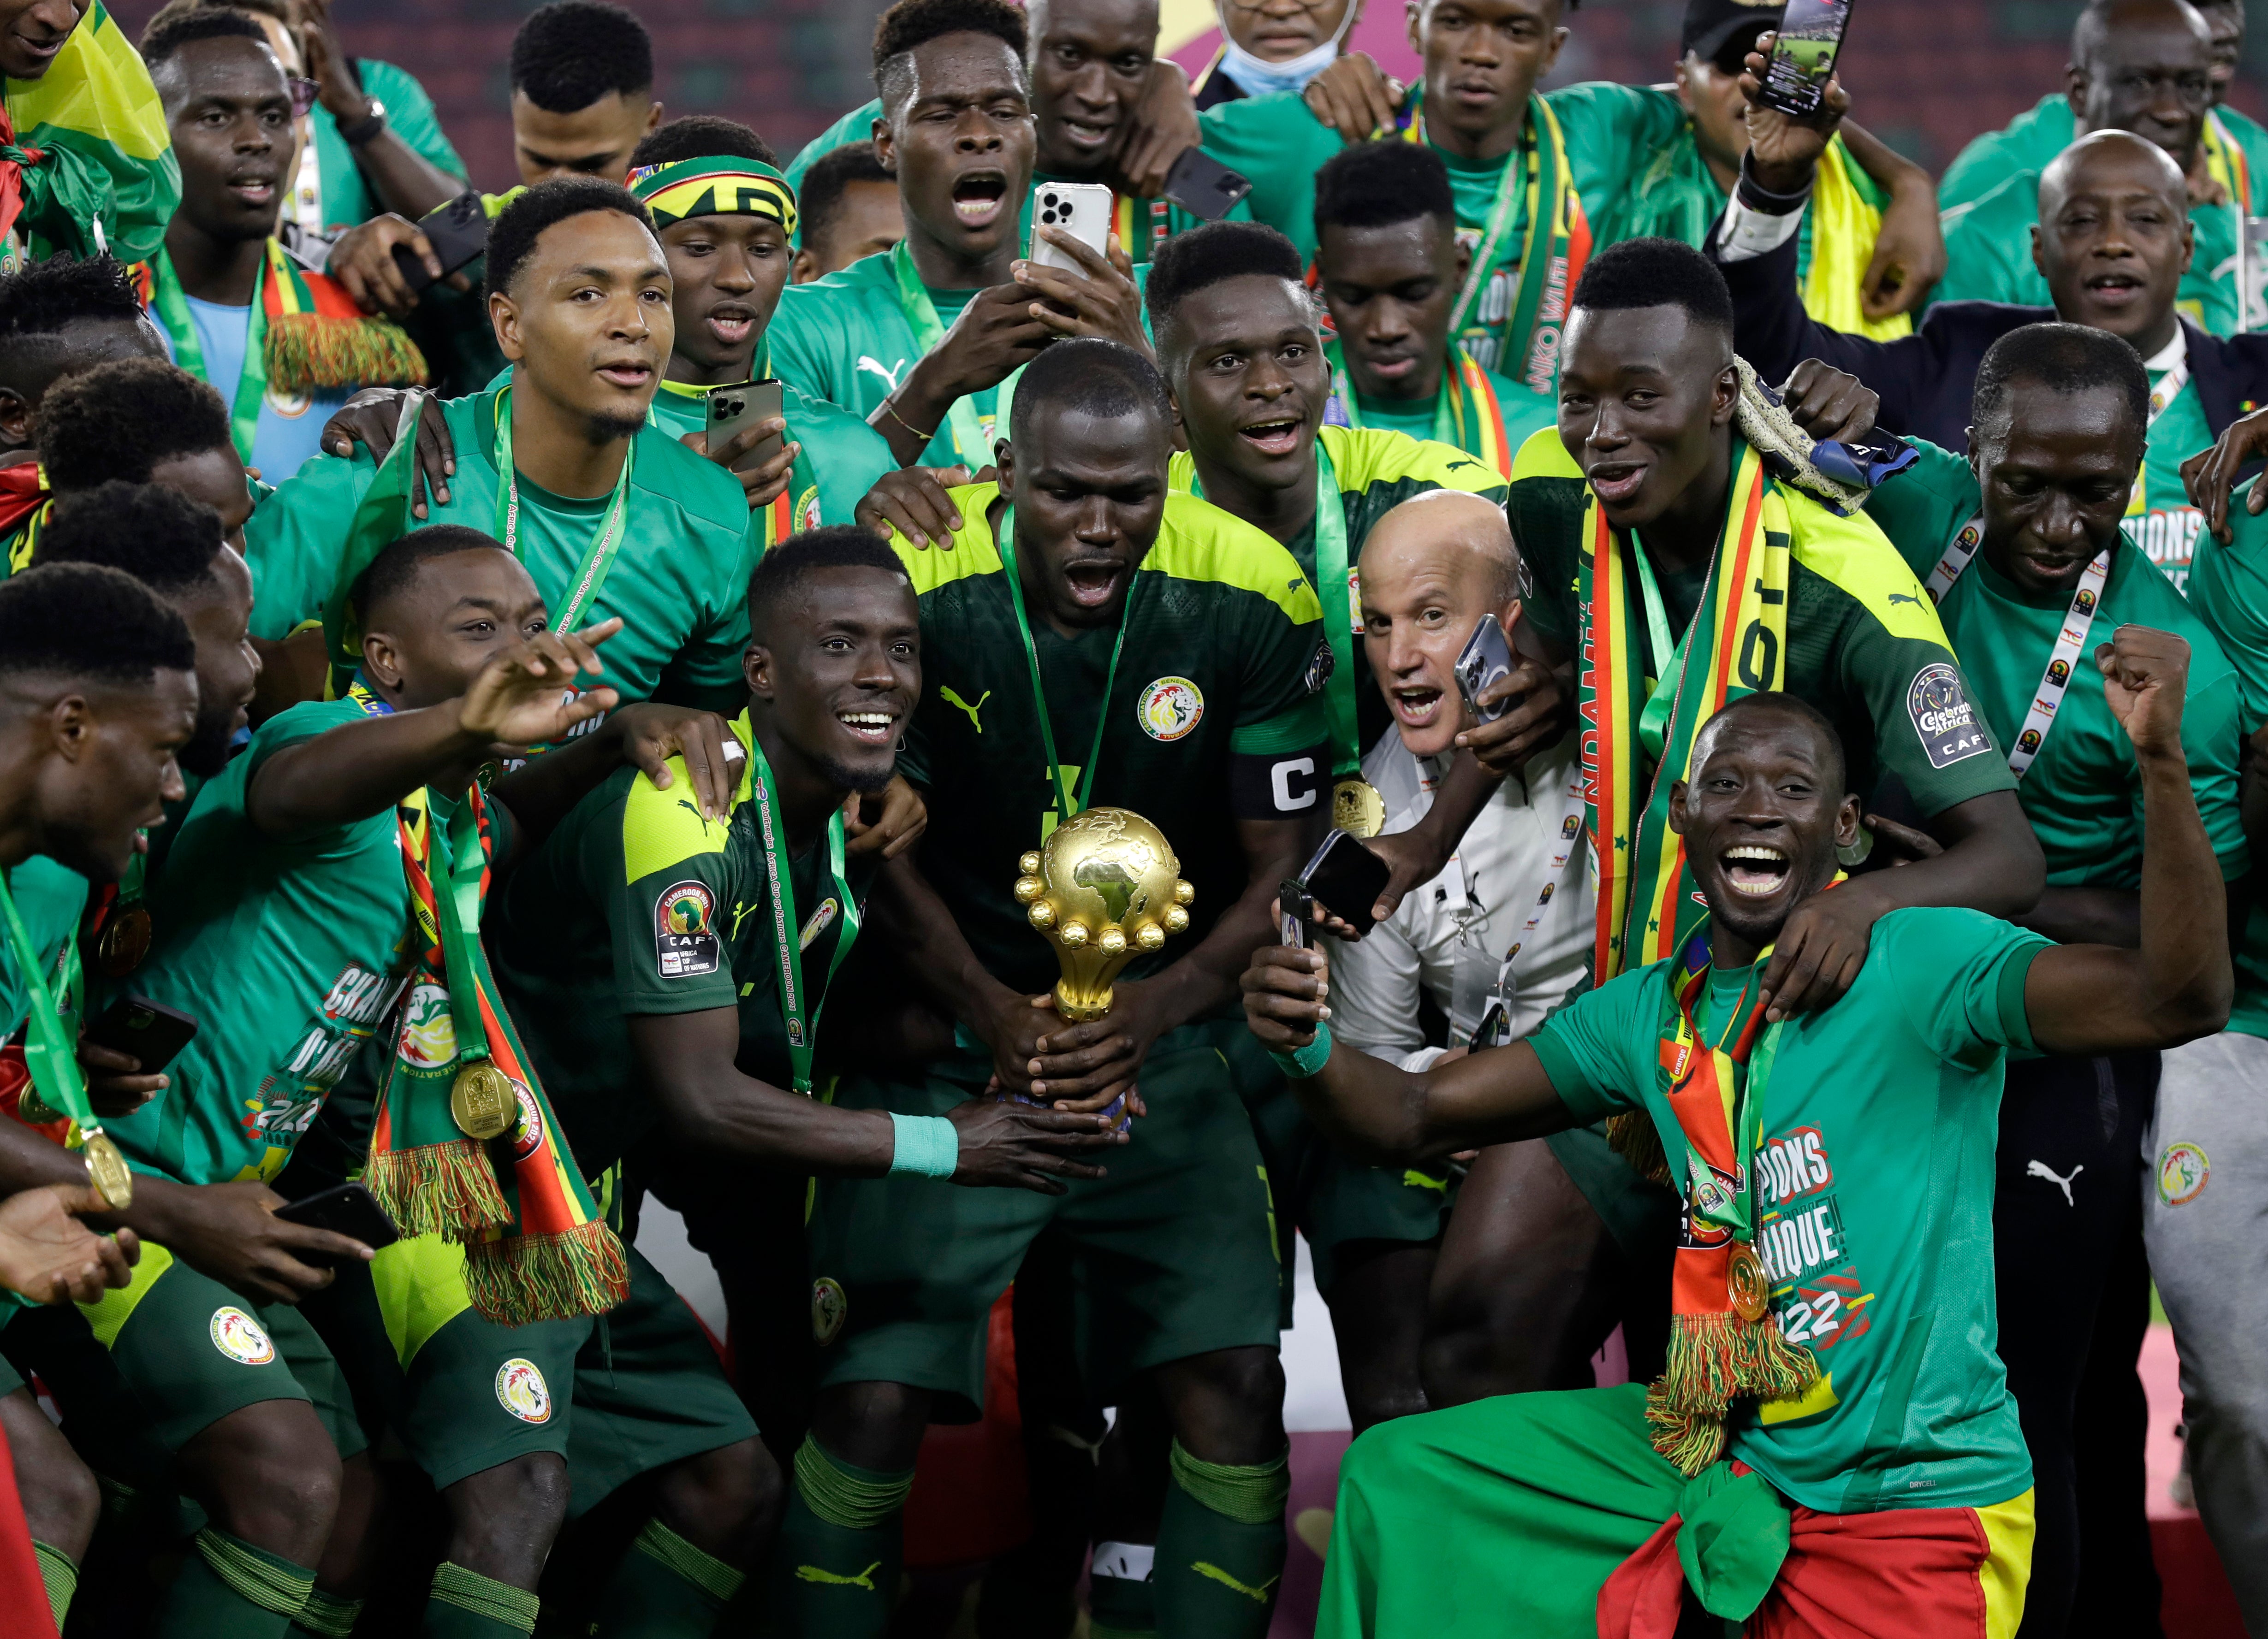 Senegal celebrate with trophy after winning the African Cup of Nations final on penalties (Sunday Alamba/AP/PA)